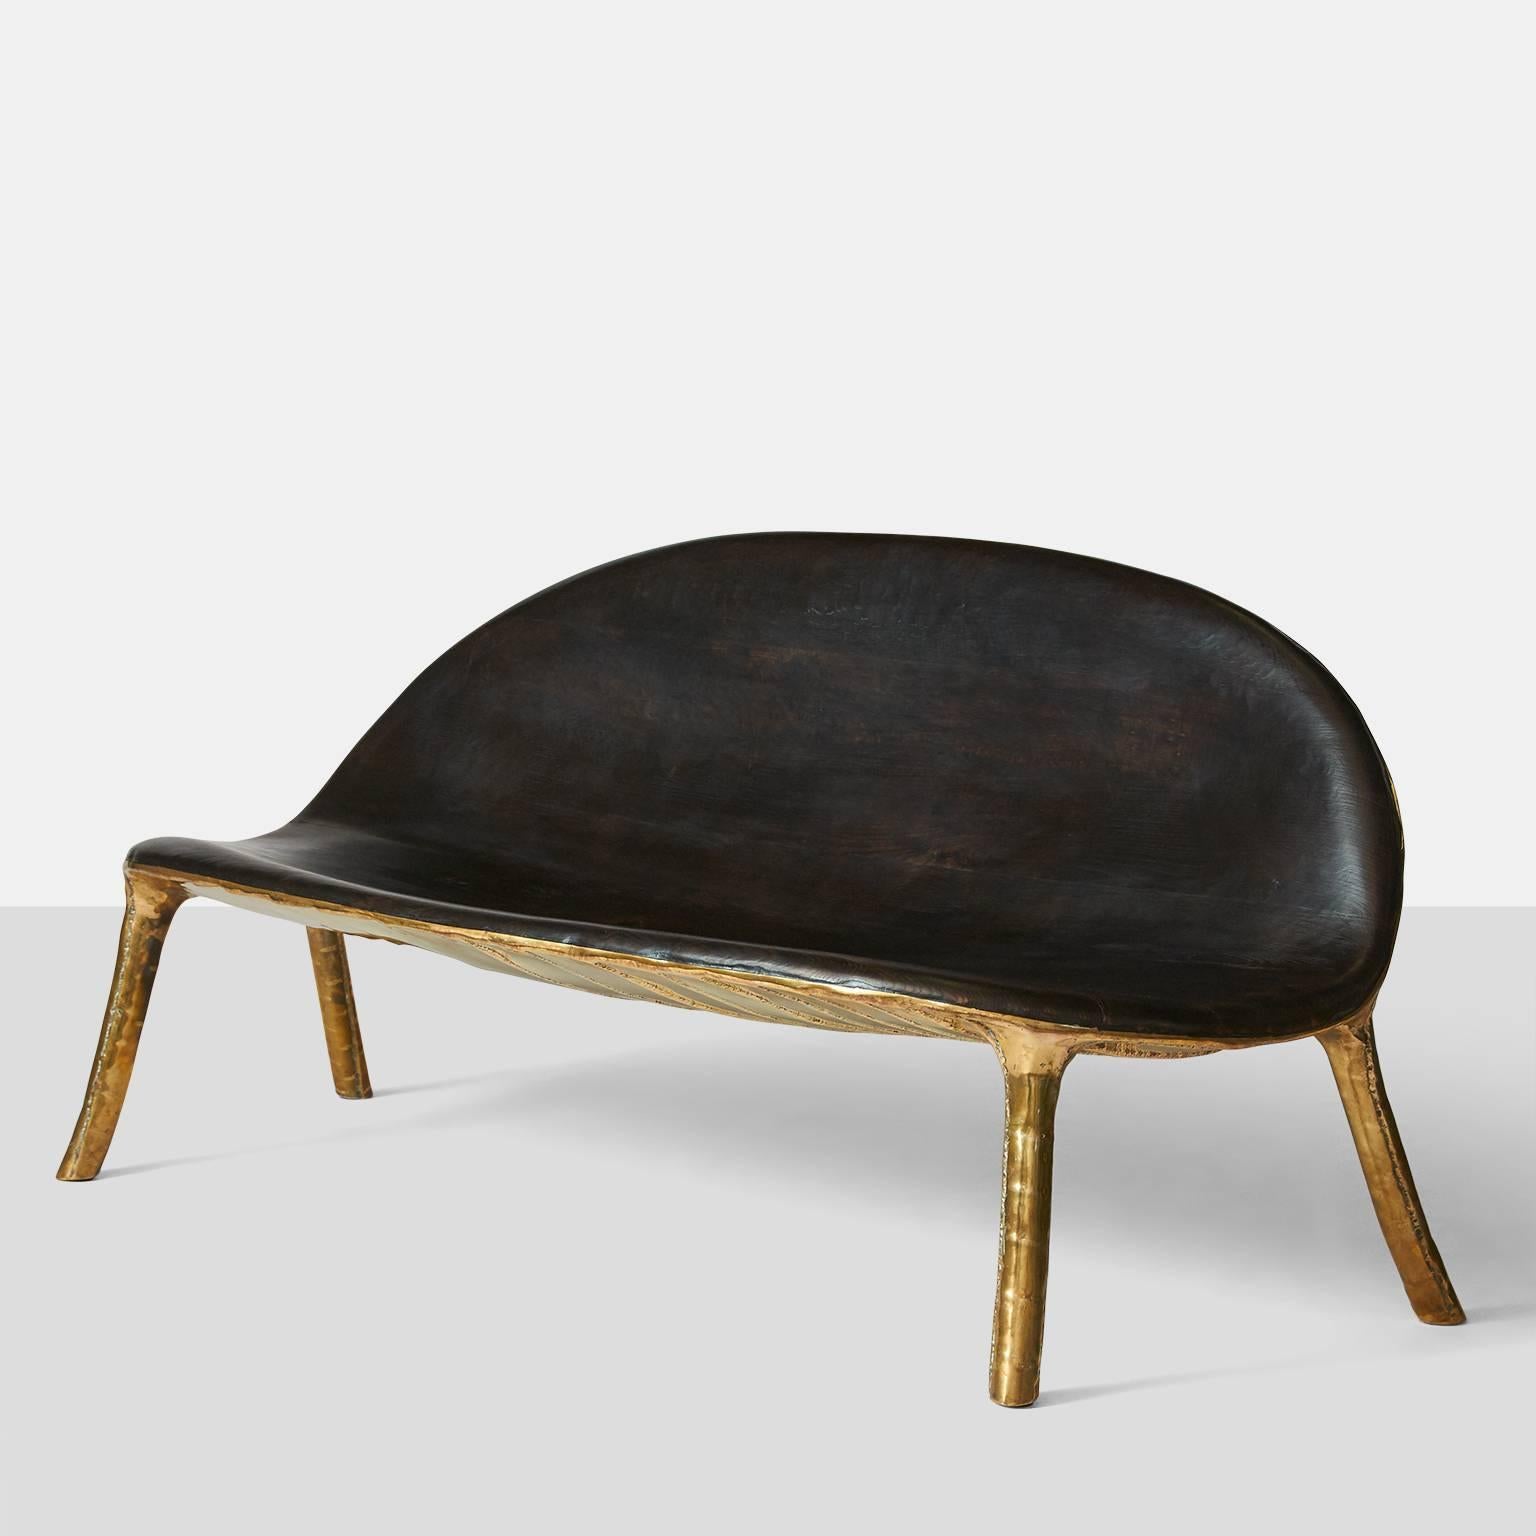 A sofa by German furniture designer Valentine Loellmann made in 2015. Completely hand constructed in brass and not cast, with a charred oak seat and back that has been made to fit the curved shape. The brass construction creates a unique pattern on